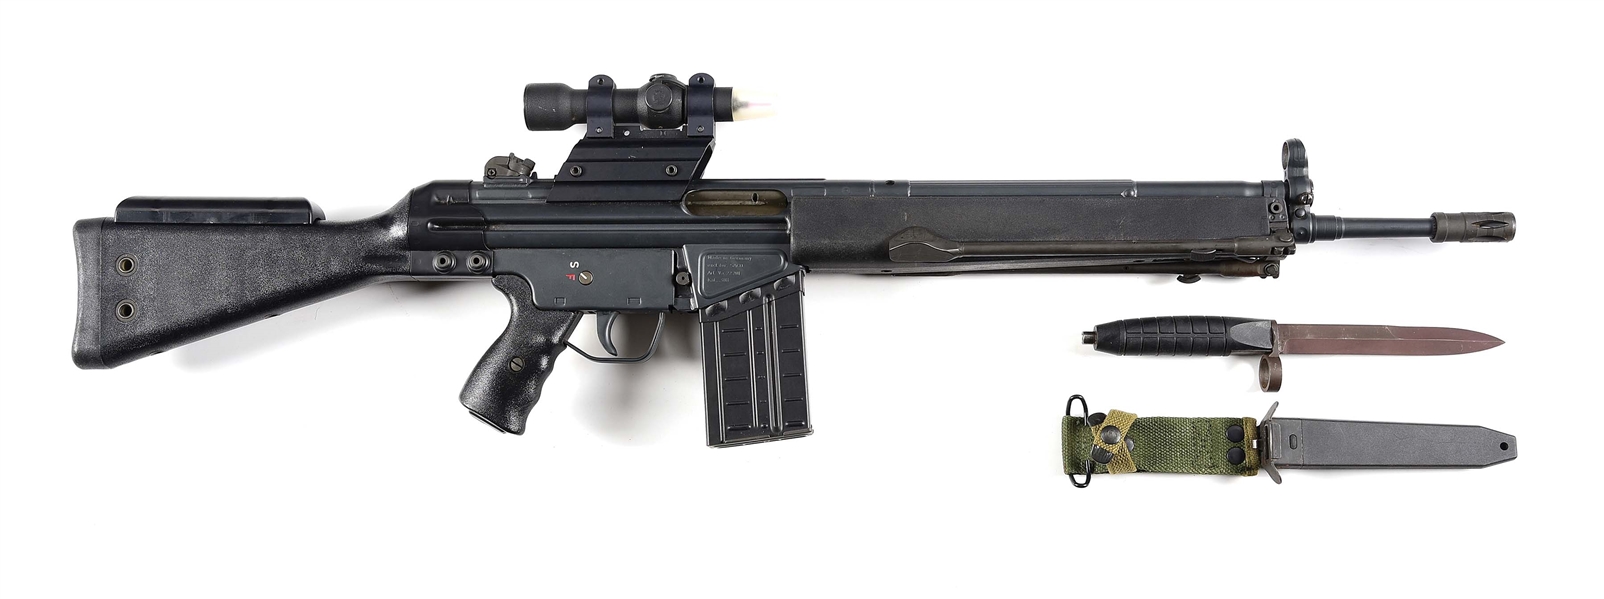 (M) HIGH CONDITION AND HIGHLY DESIRABLE PRE-BAN HECKLER & KOCH HK91 SEMI-AUTOMATIC RIFLE WITH ACCESSORIES.